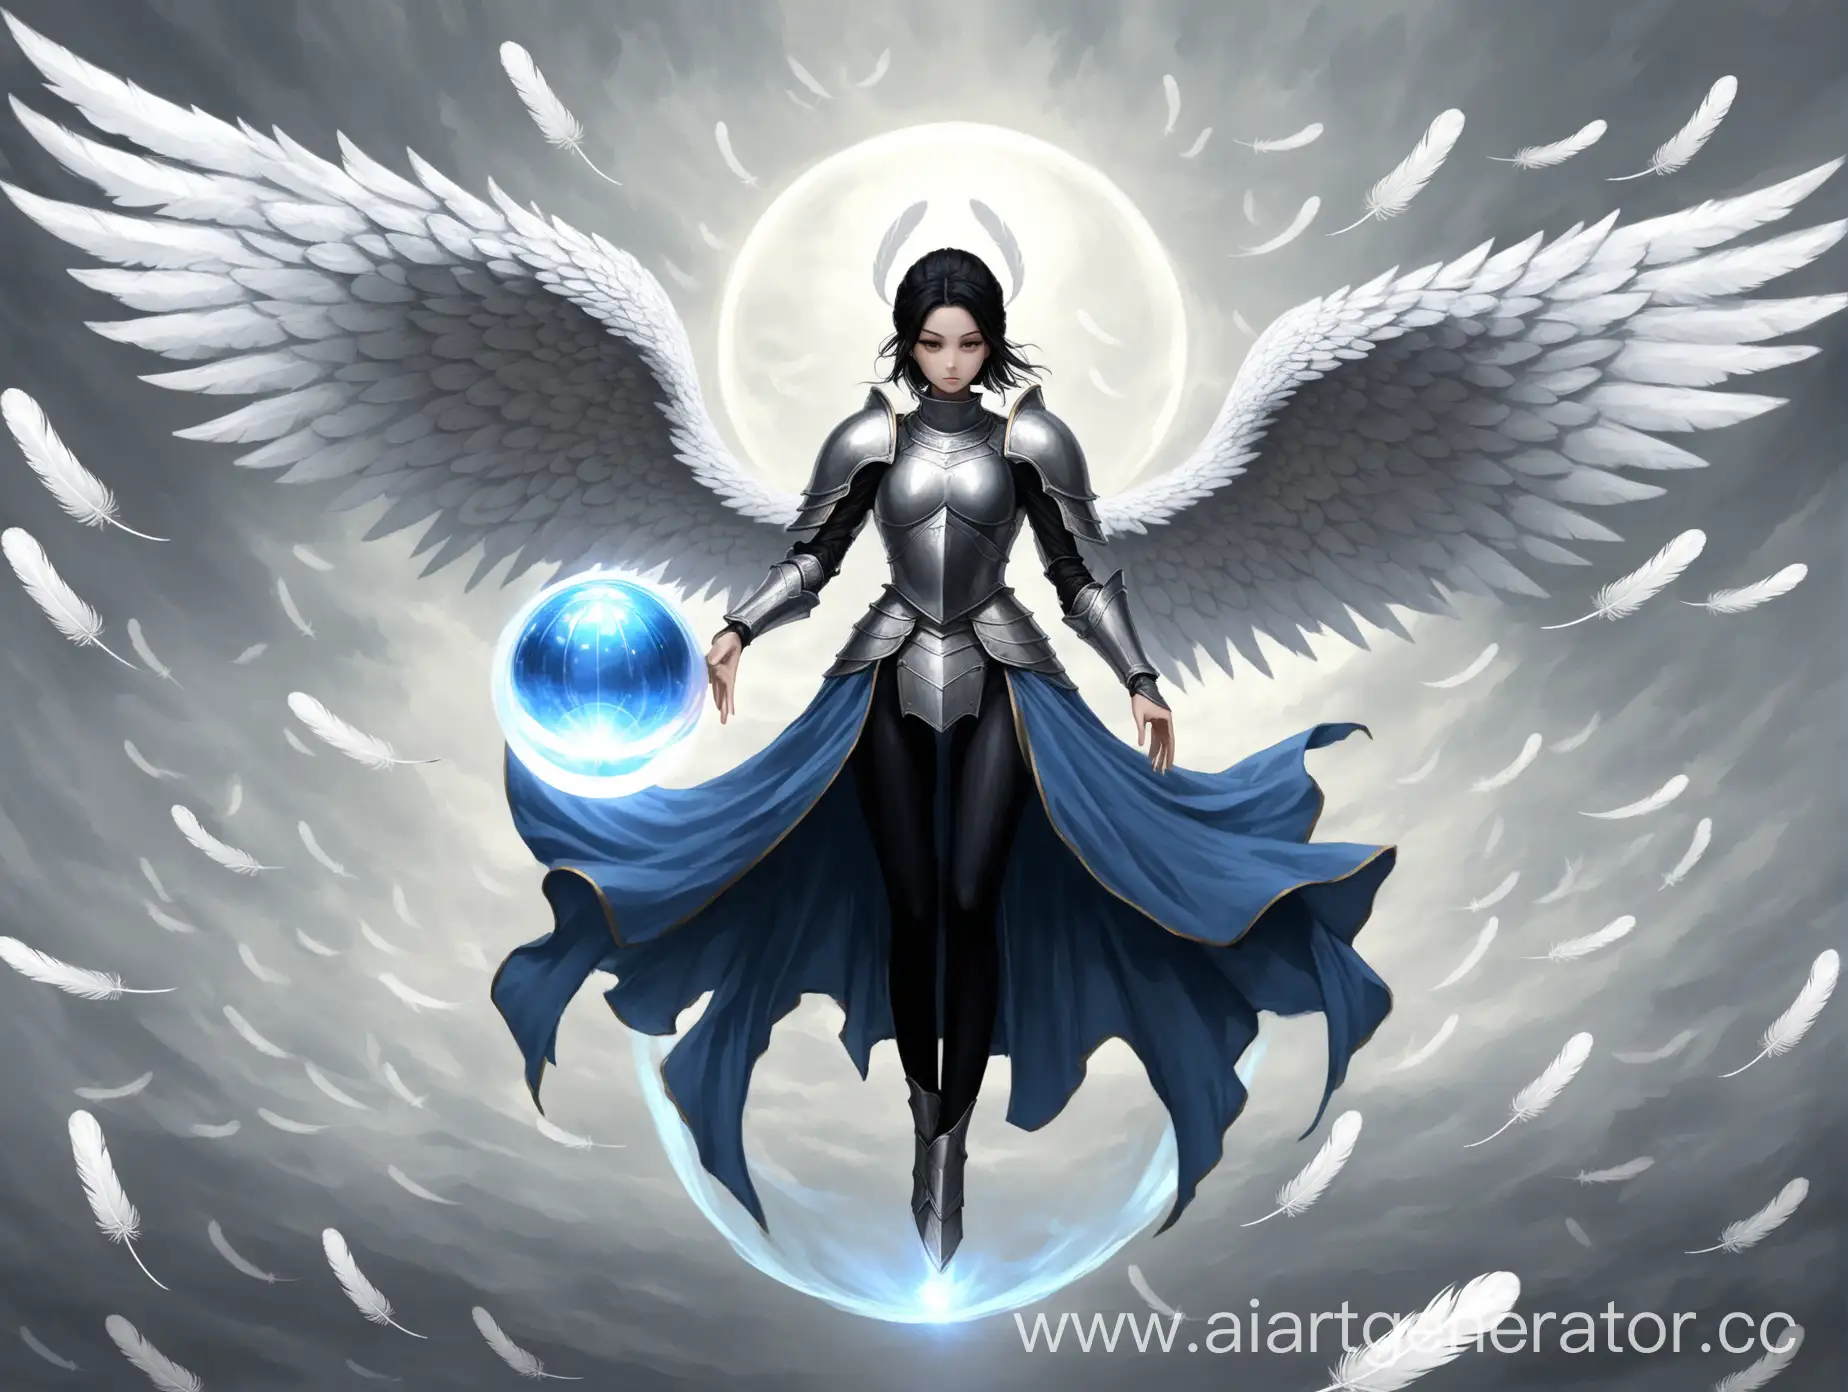 Woman, slim, collected in a bun black hair, full height, grey armour, helmet, closed neck and chest, black leggings, blue surcoat, blue cloth, long sword, magic ball in one hand, floating in the air, a judgmental look, gigantic wings, looks down on you, white wings, white feathers flying around, grey sky